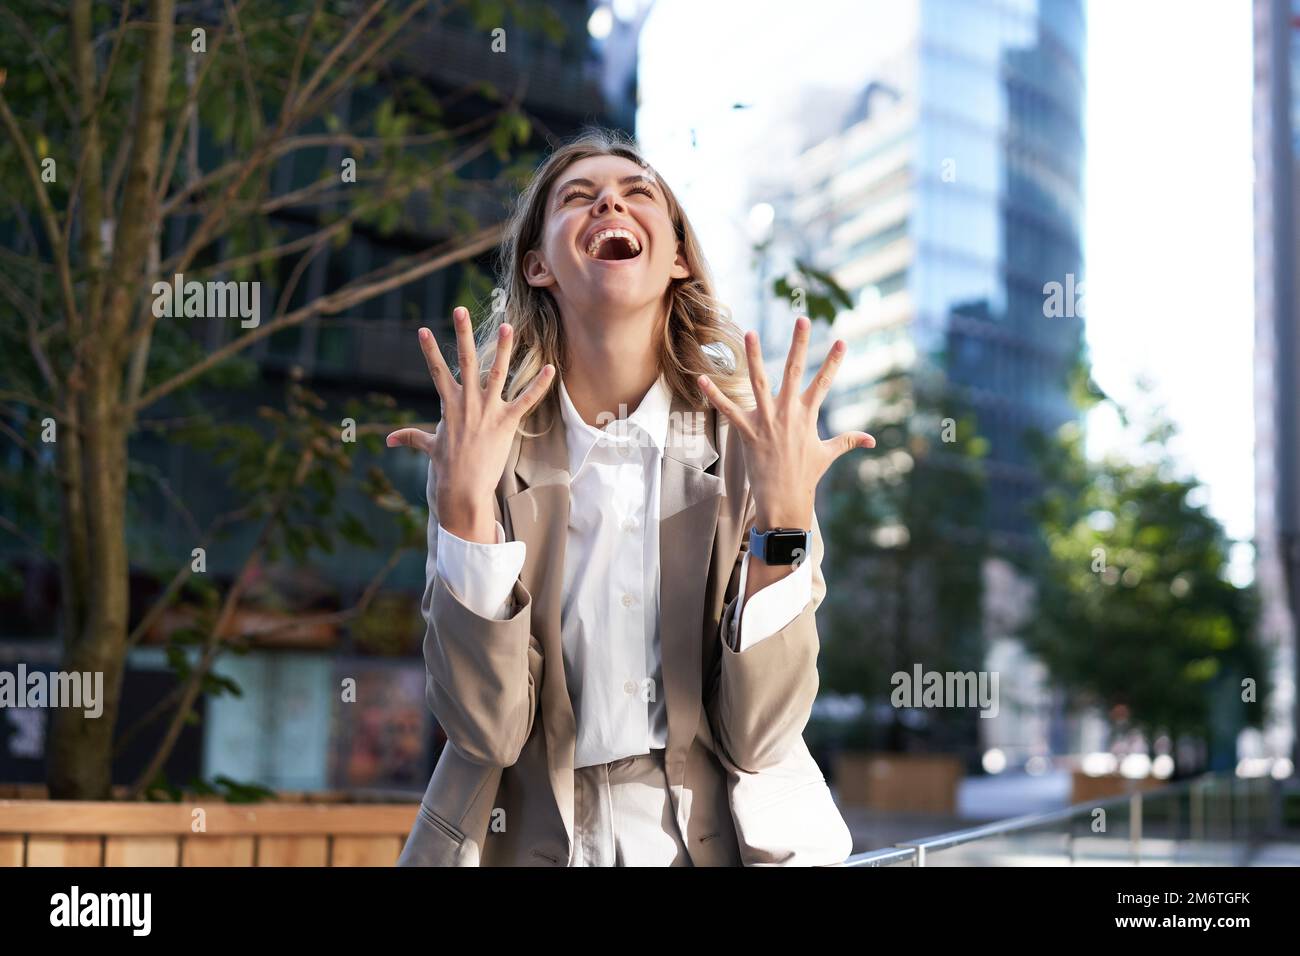 Enthusiastic businesswoman rejoicing, celebrating and feeling happy, express pure joy, standing on street in beige suit Stock Photo